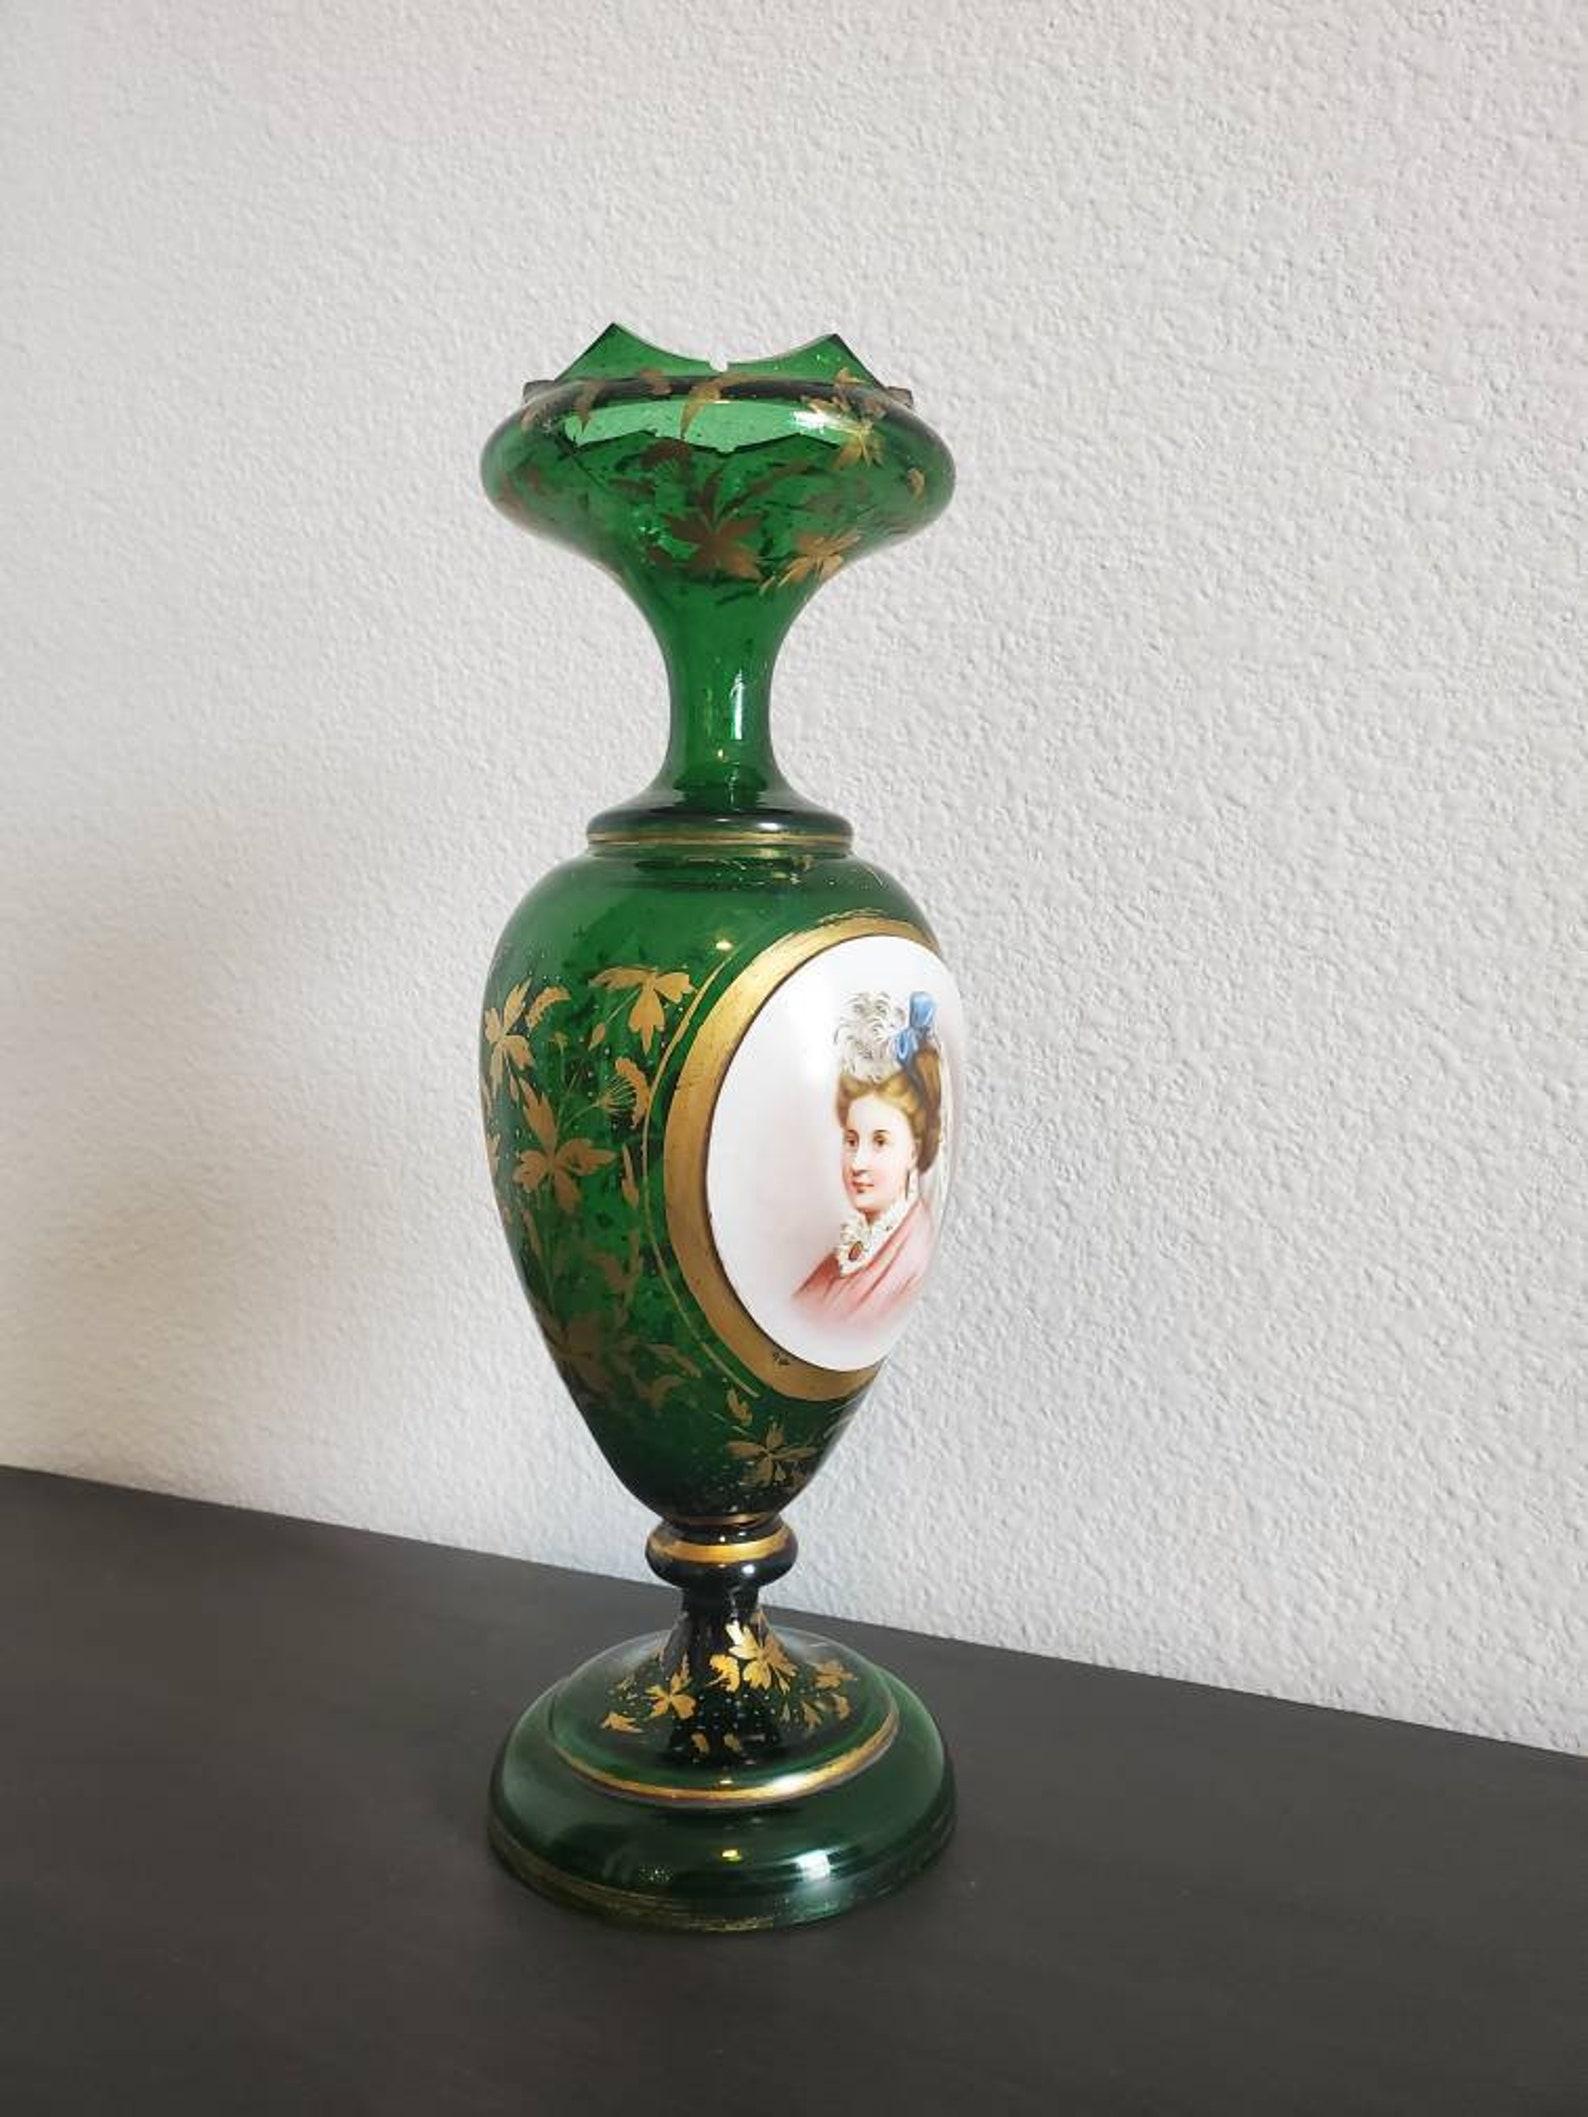 A very fine quality antique Bohemian glass parcel-gilt emerald green art glass portrait vase, handmade by world renowned luxury glassware manufacturer, Moser Glassworks (1857-present)

Hand blown and painted in Bohemia (present day Czech Republic)